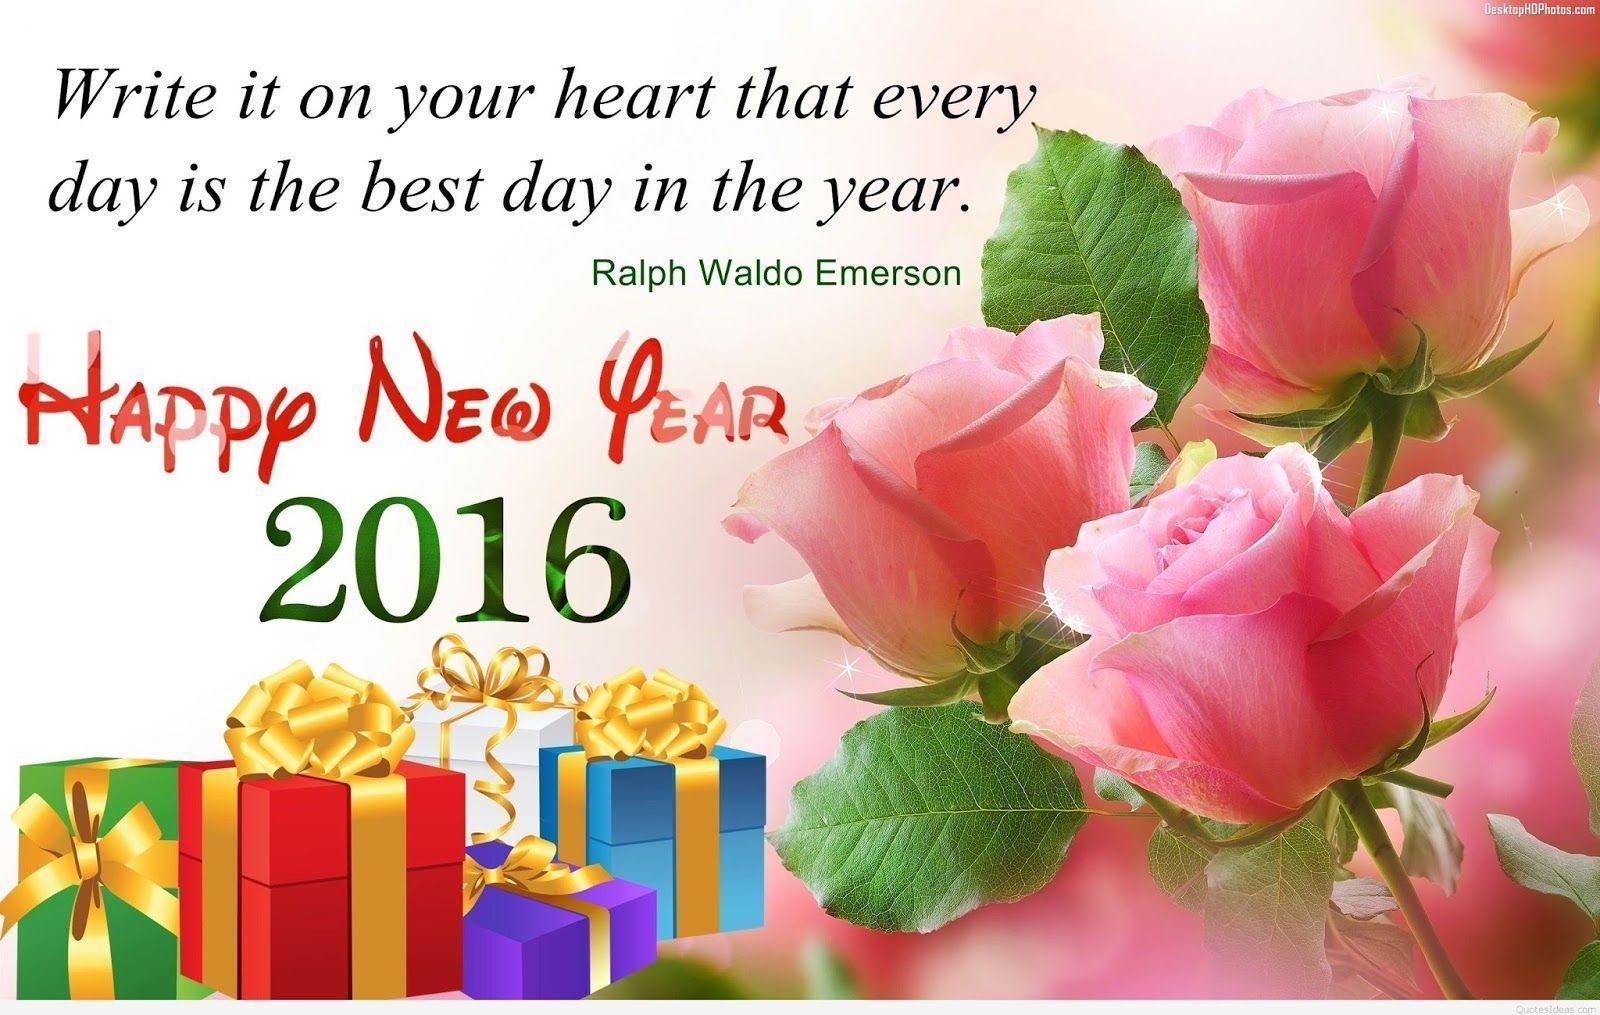 Download New Year Greetings Cards and Wallpaper. Happy New Year